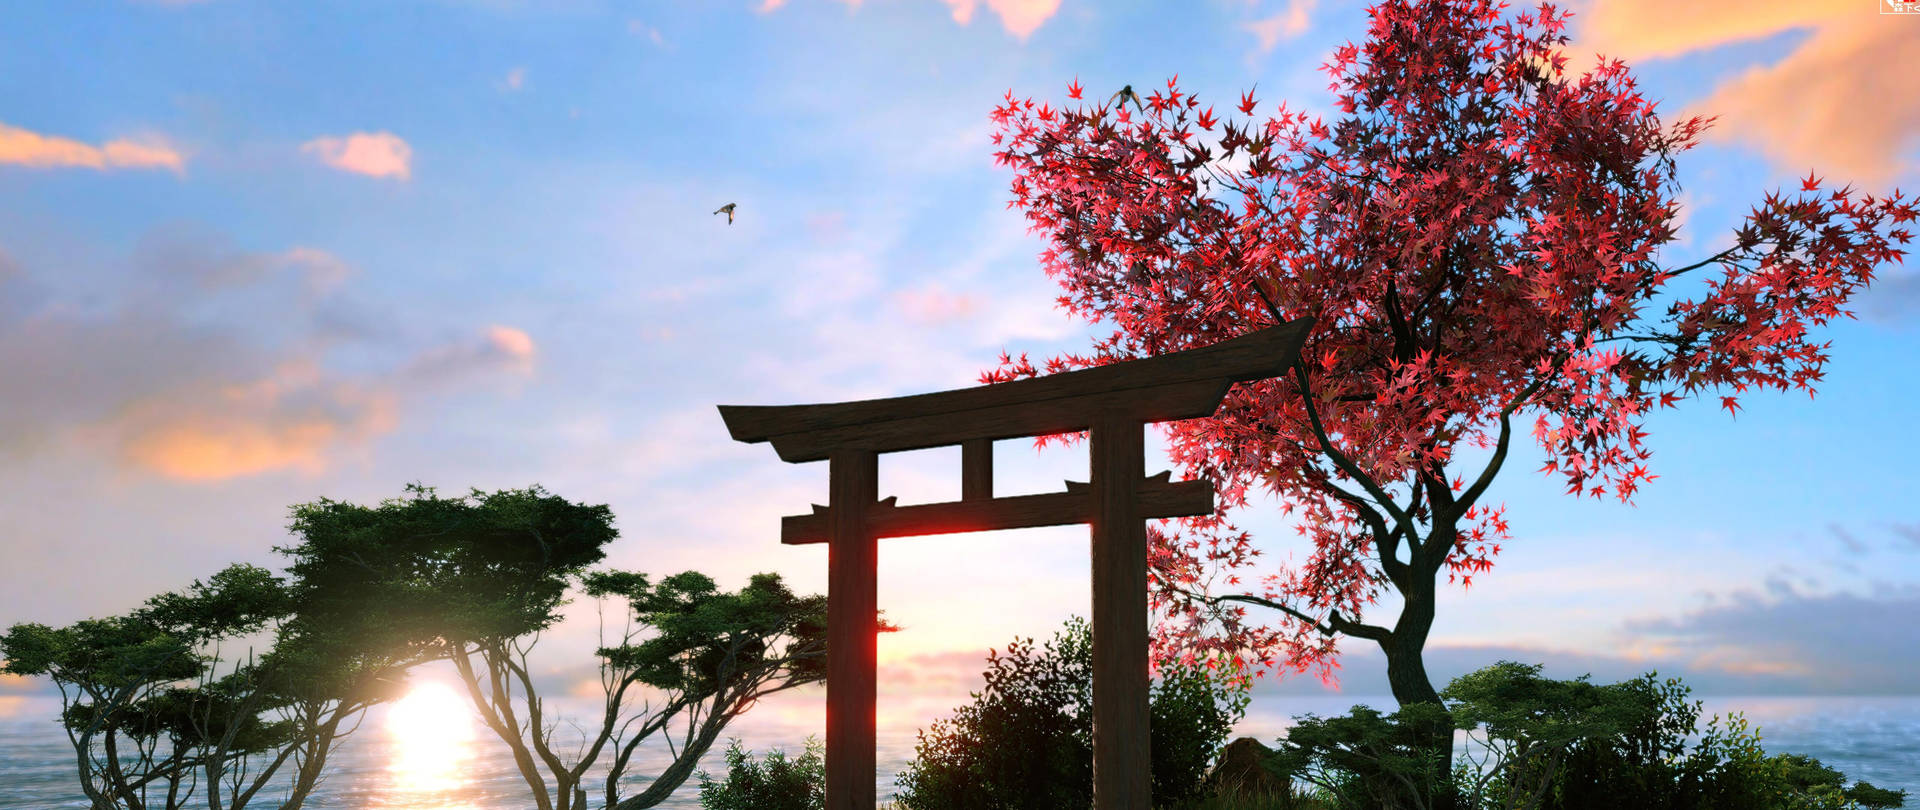 Torii Gate Pictures Wallpaper